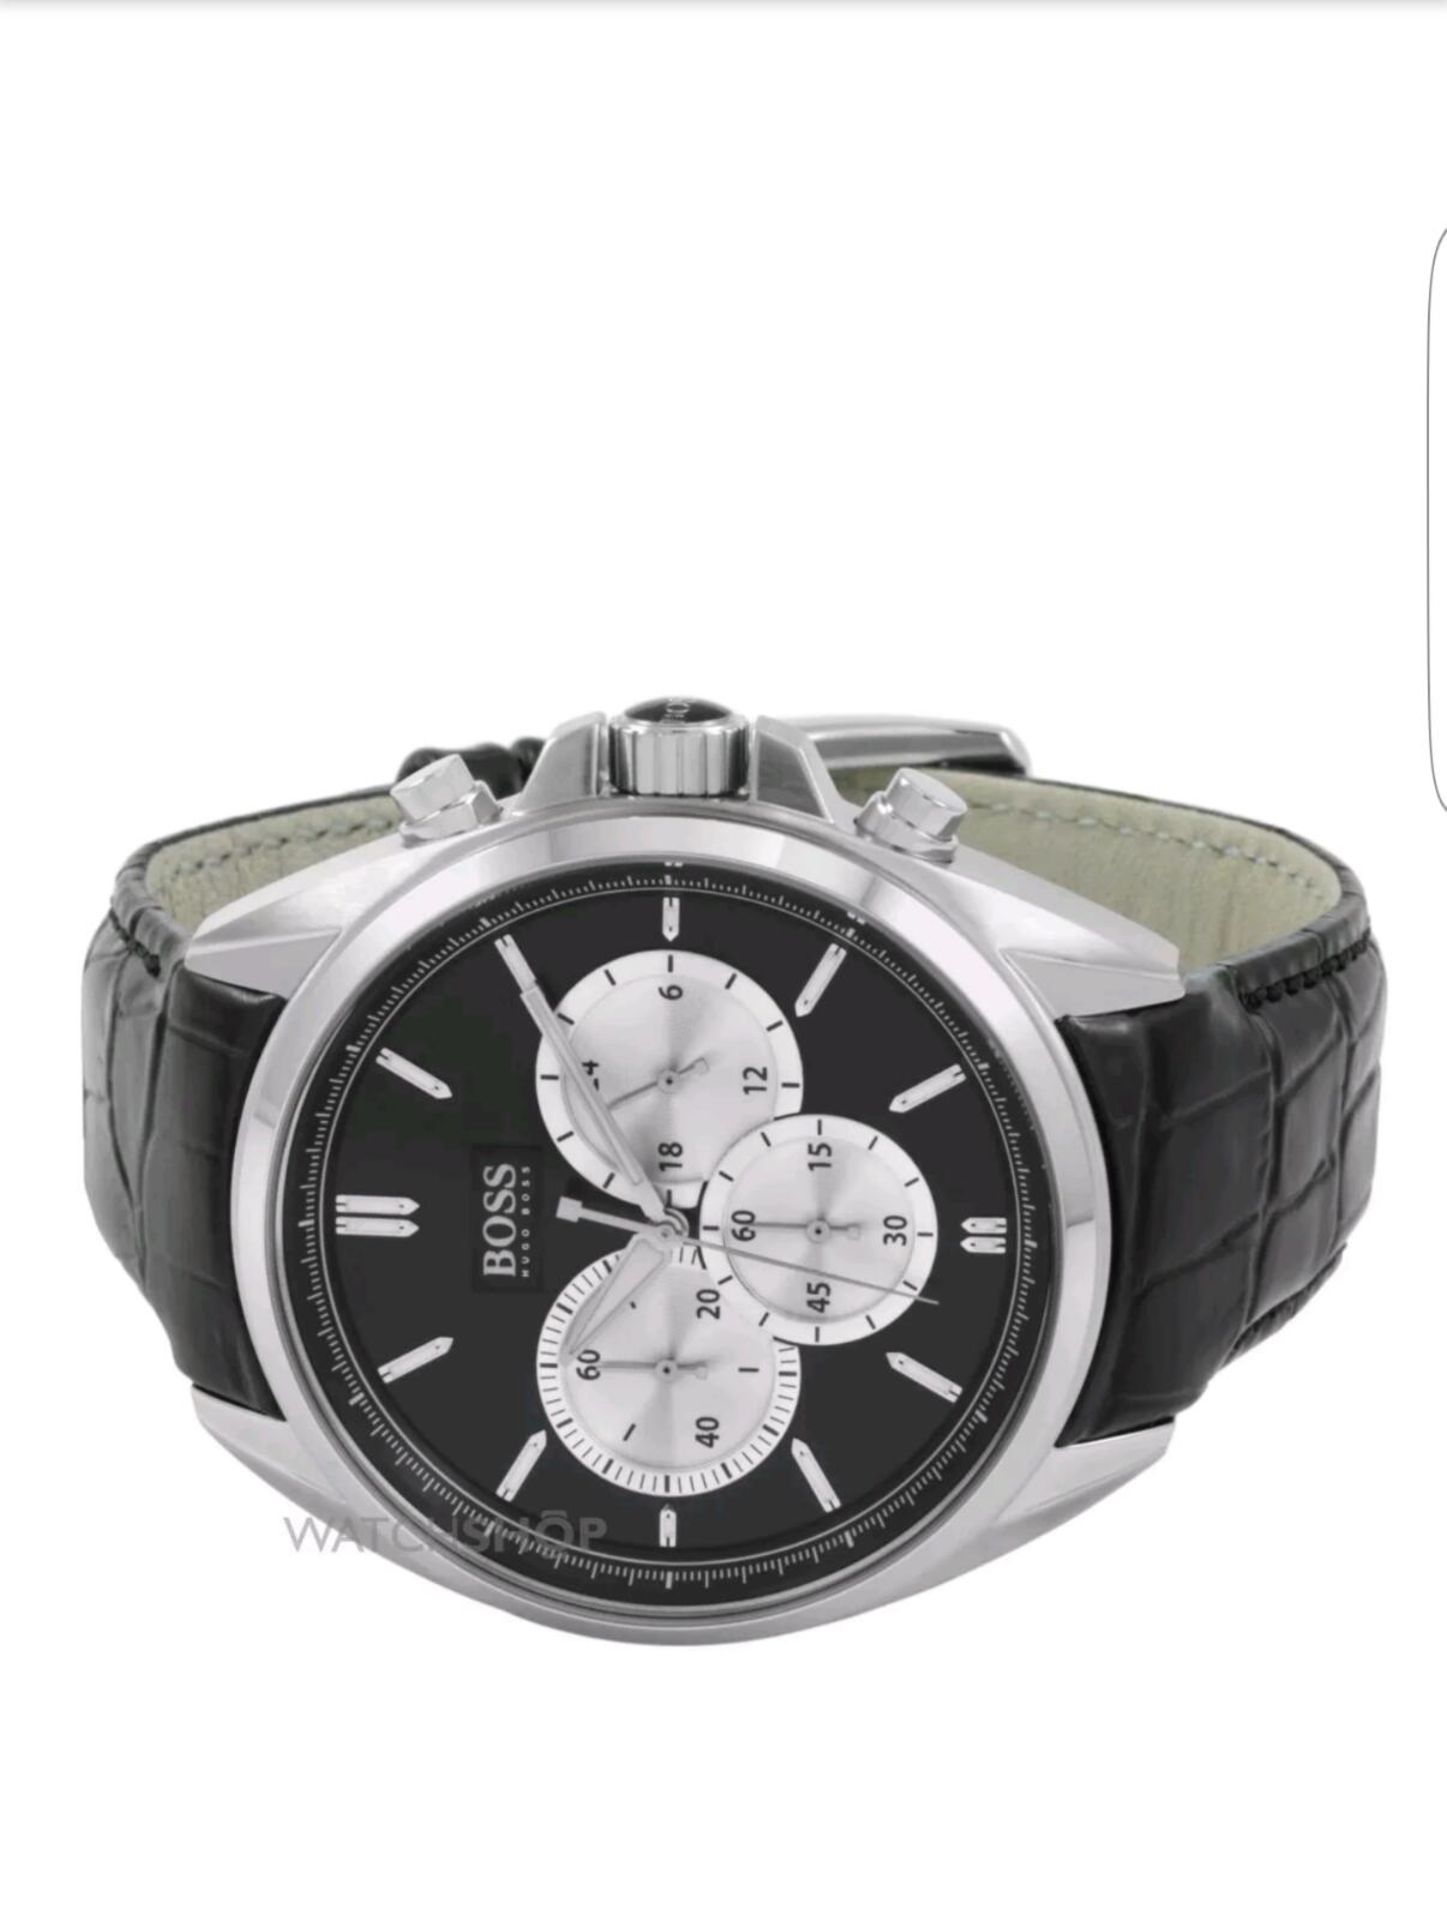 BRAND NEW HUGO BOSS 1512879, GENT'S LEATHER STRAP DESIGNER CHRONOGRAPH WATCH, COMPLETE WITH - Image 2 of 2